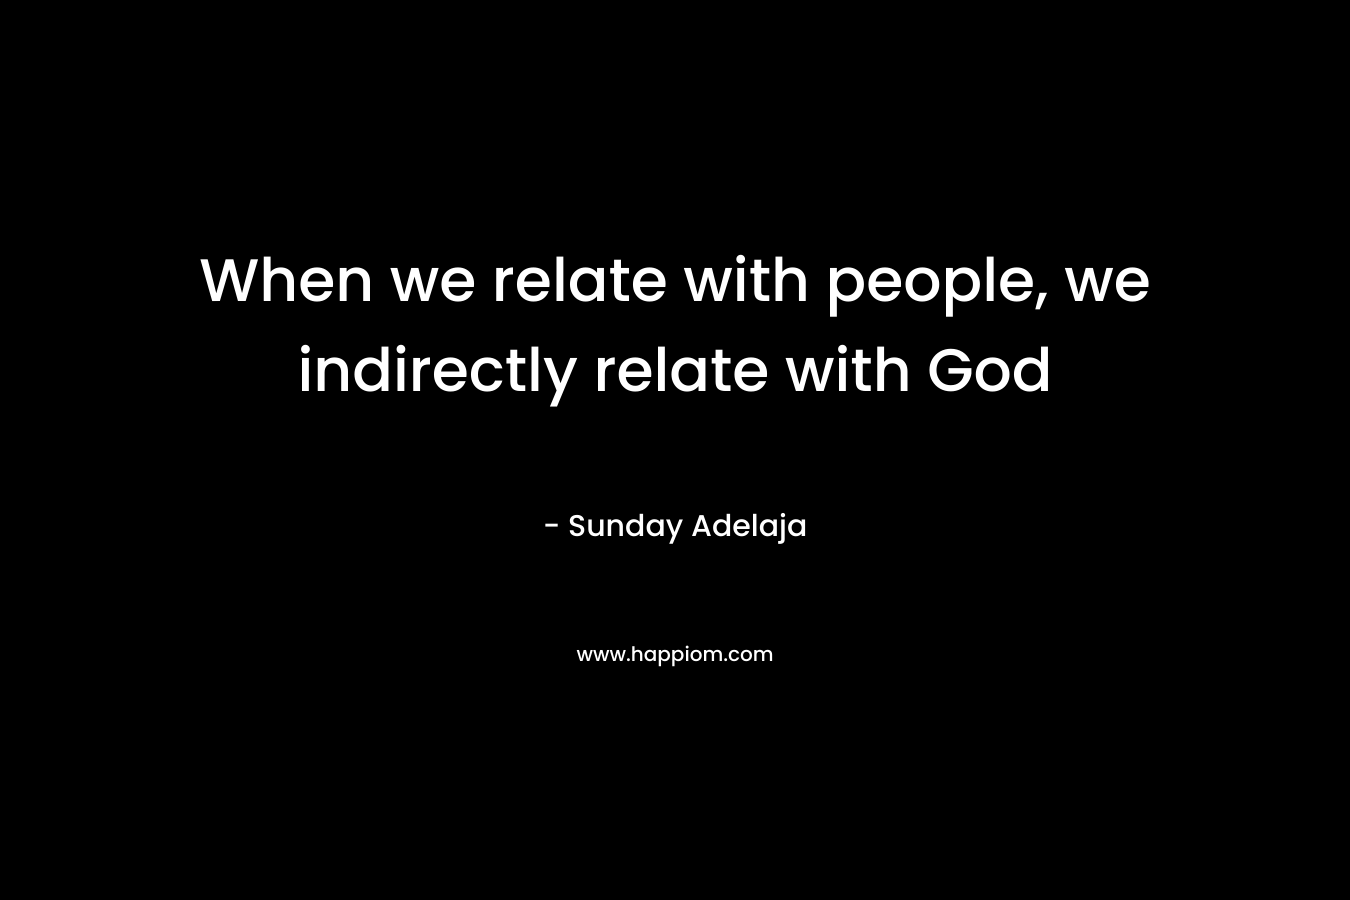 When we relate with people, we indirectly relate with God